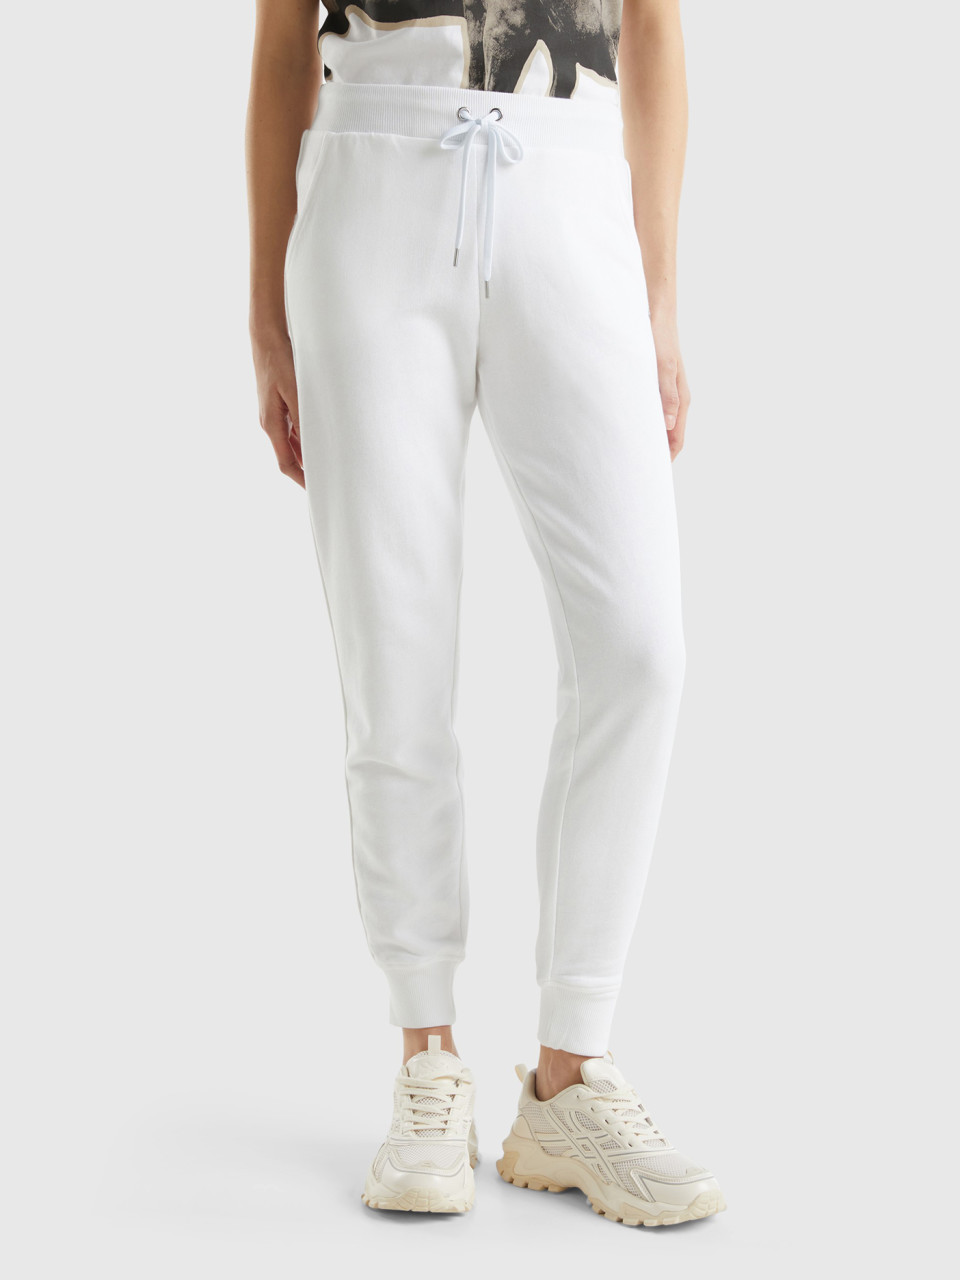 Benetton, Joggers Con Coulisse, Bianco, Donna